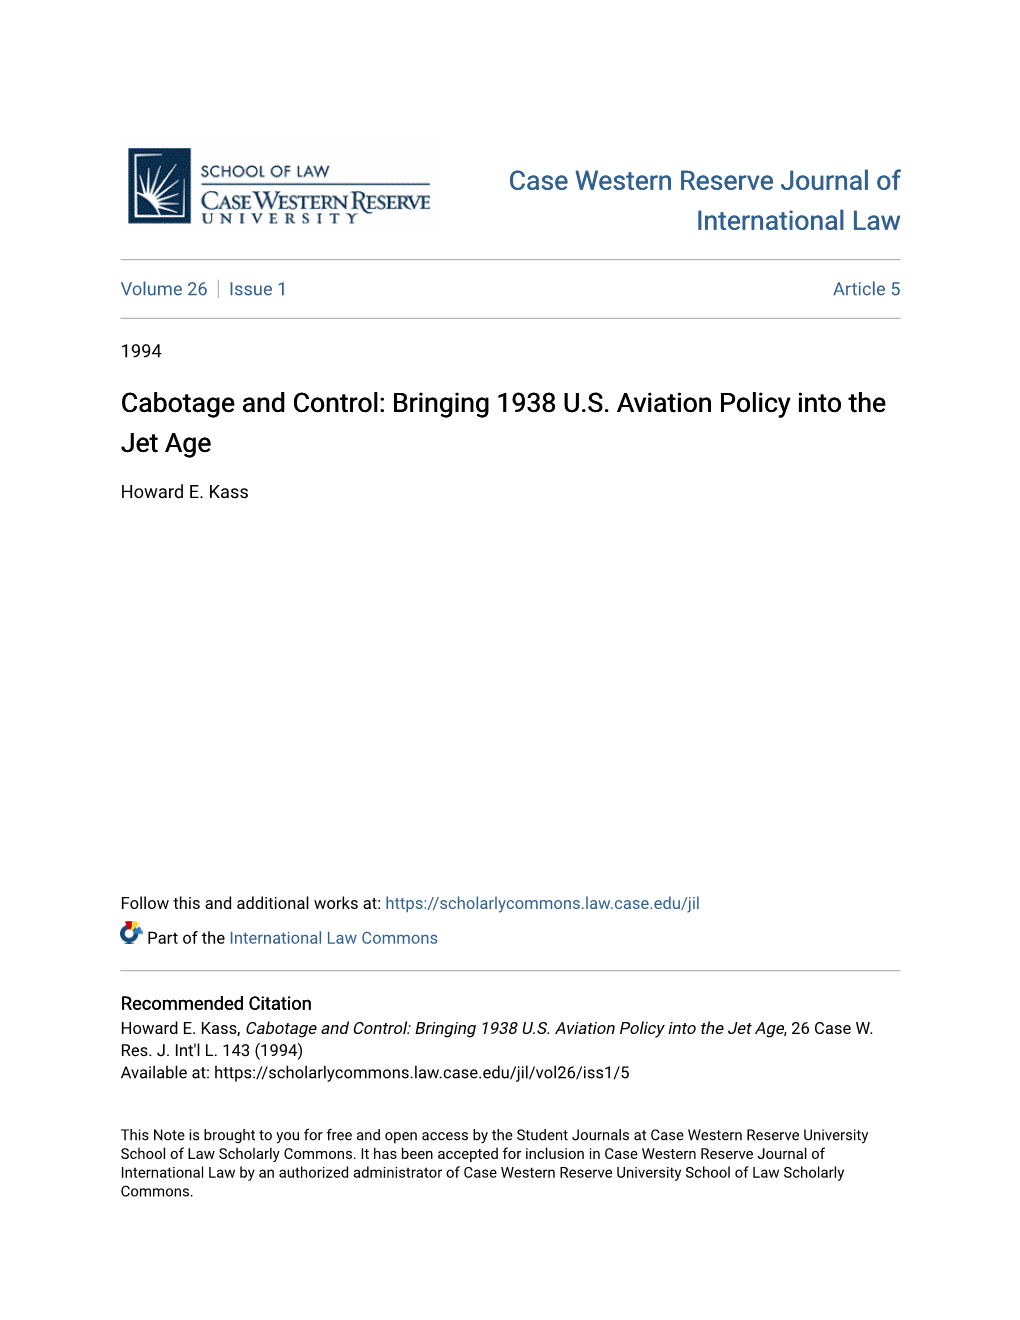 Cabotage and Control: Bringing 1938 U.S. Aviation Policy Into the Jet Age